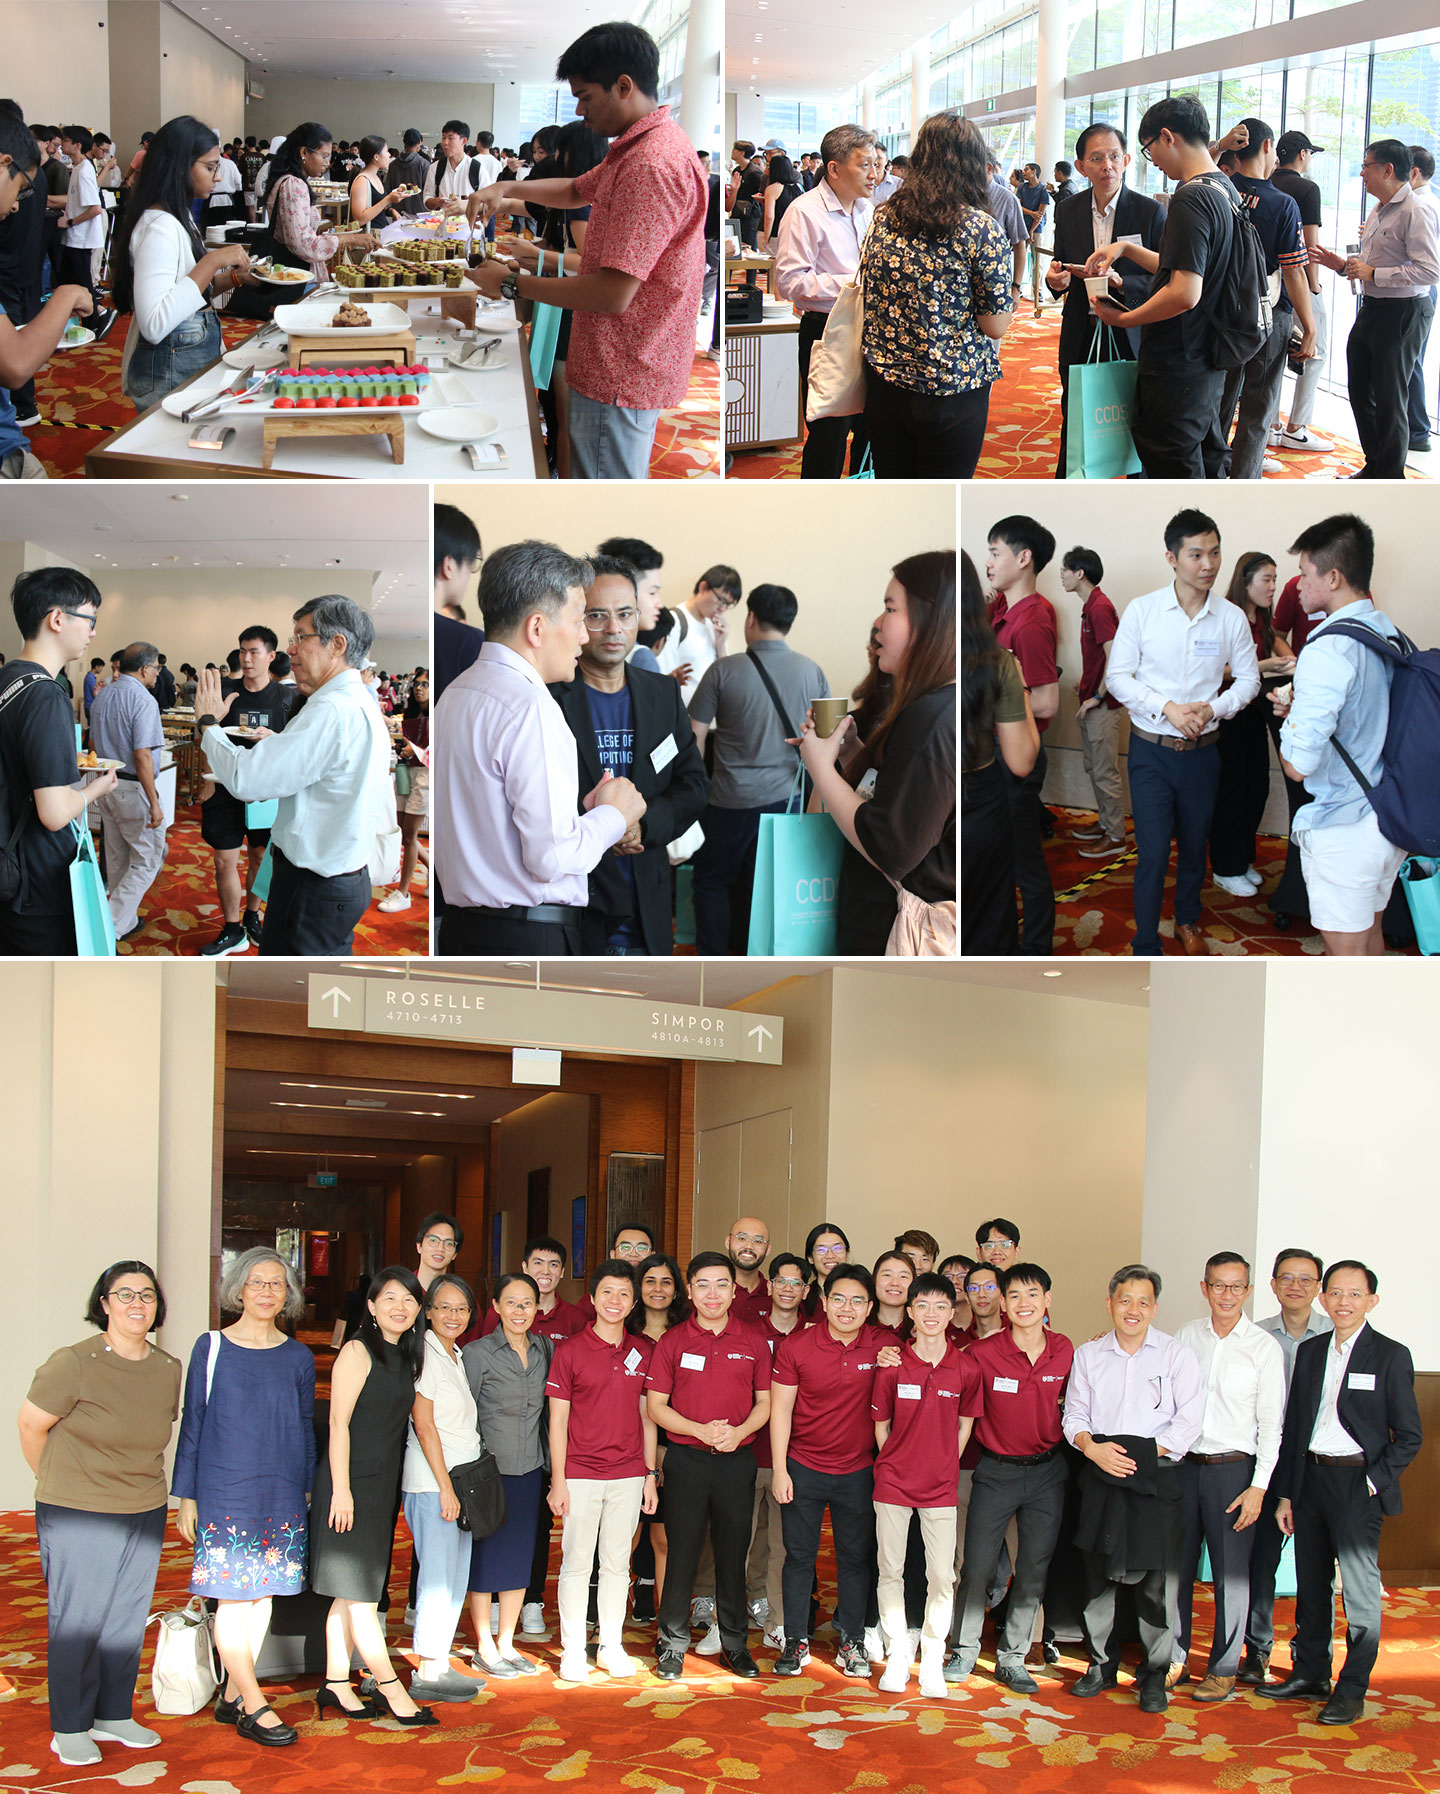 Collage photo of networking session over refreshments served at the ballroom foyer. Last photo is a group of CCDS staff & student.